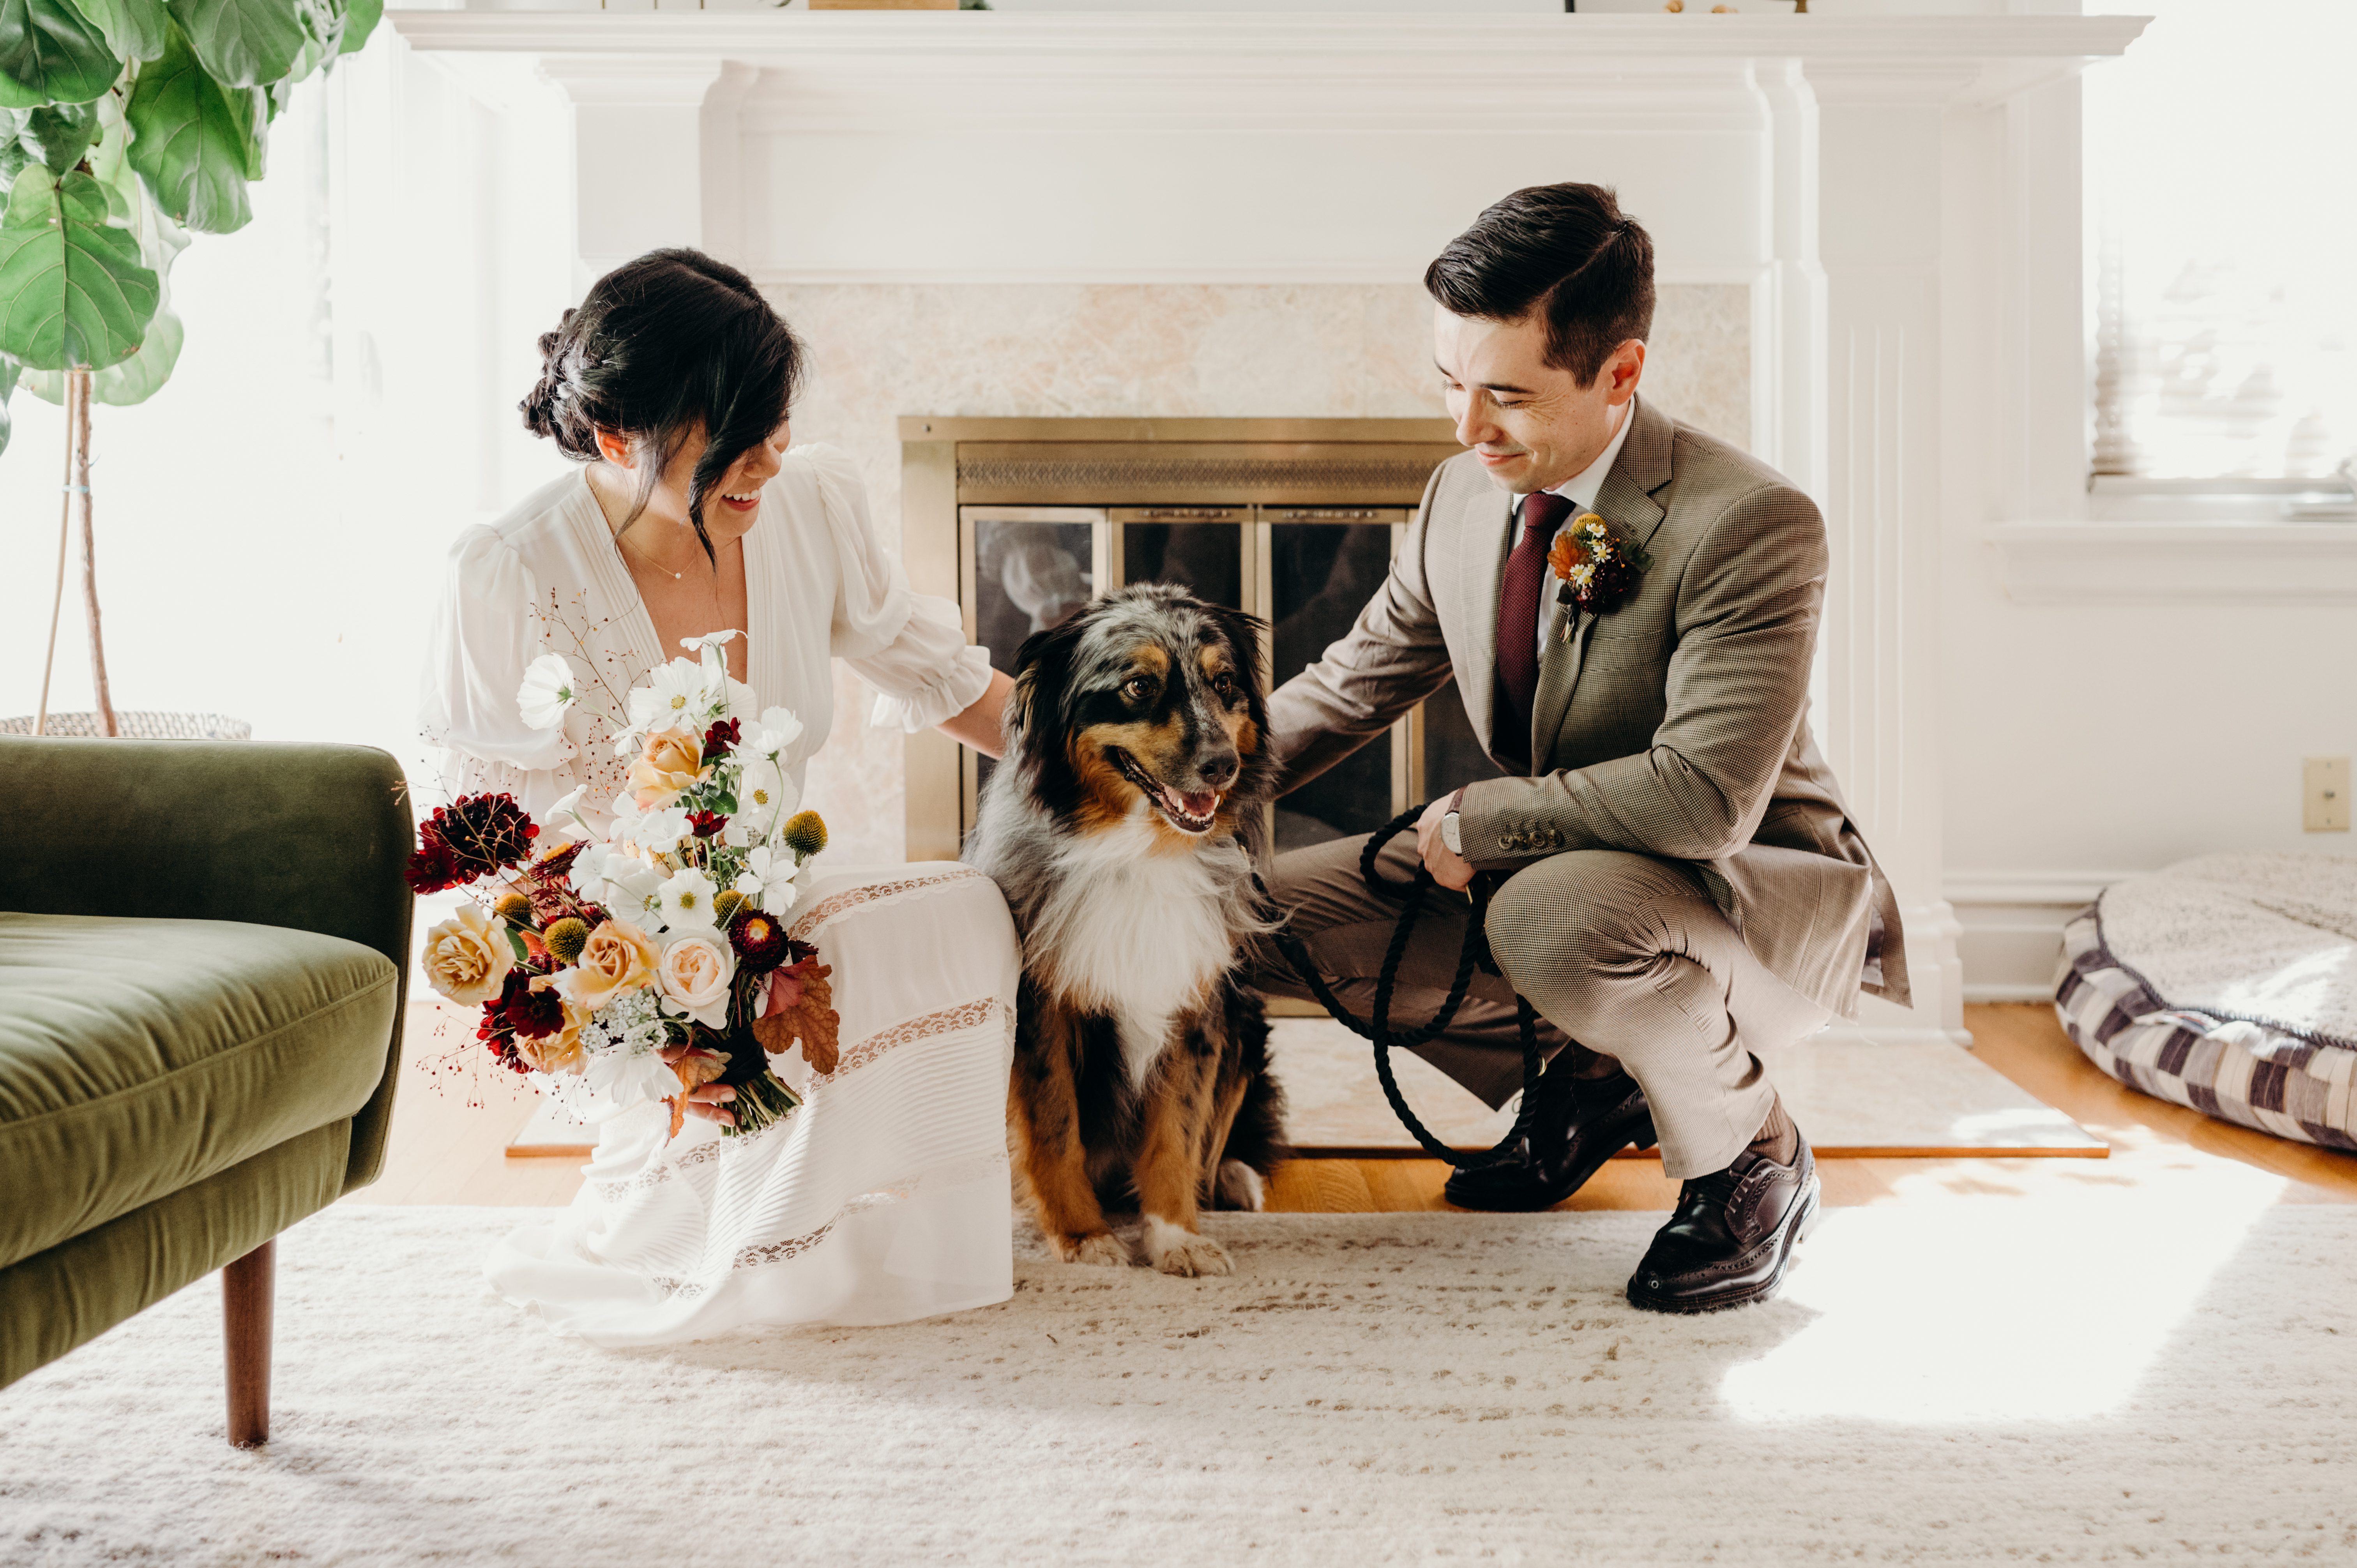 Making time to hang with your loved ones makes for a super stress-free wedding day.